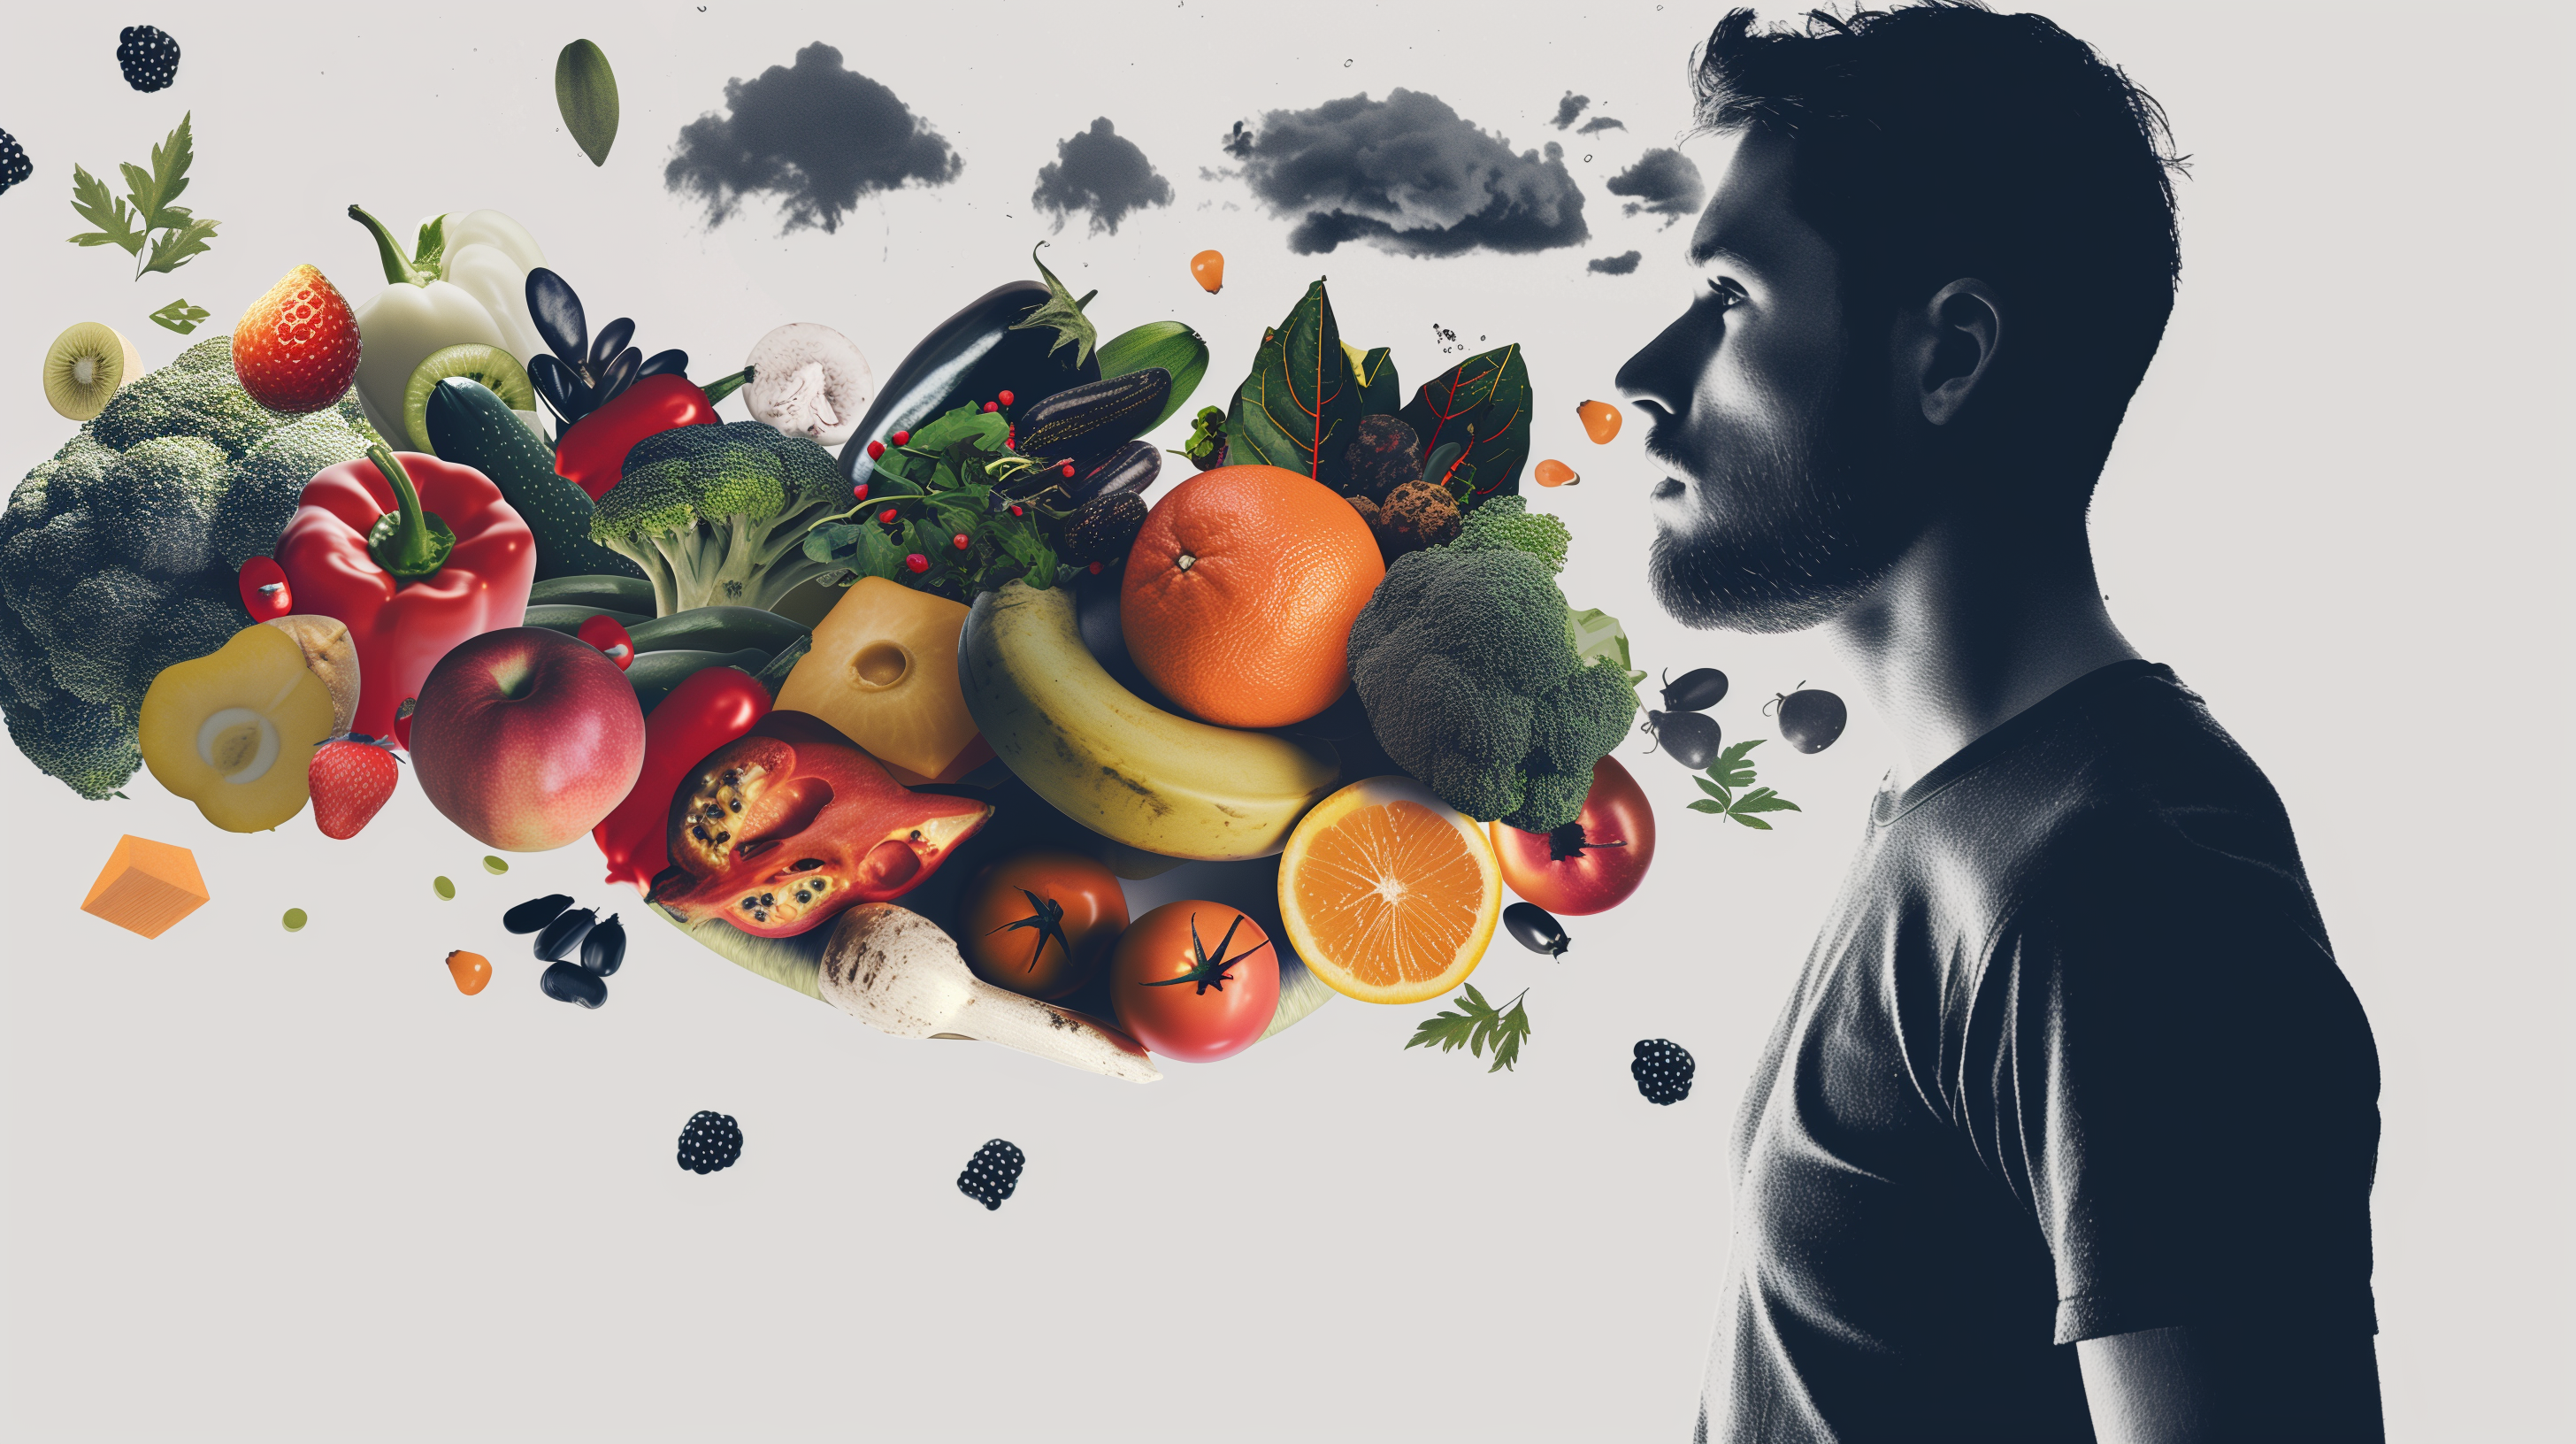 man looking contemplative, surrounded by various fruits and vegetables